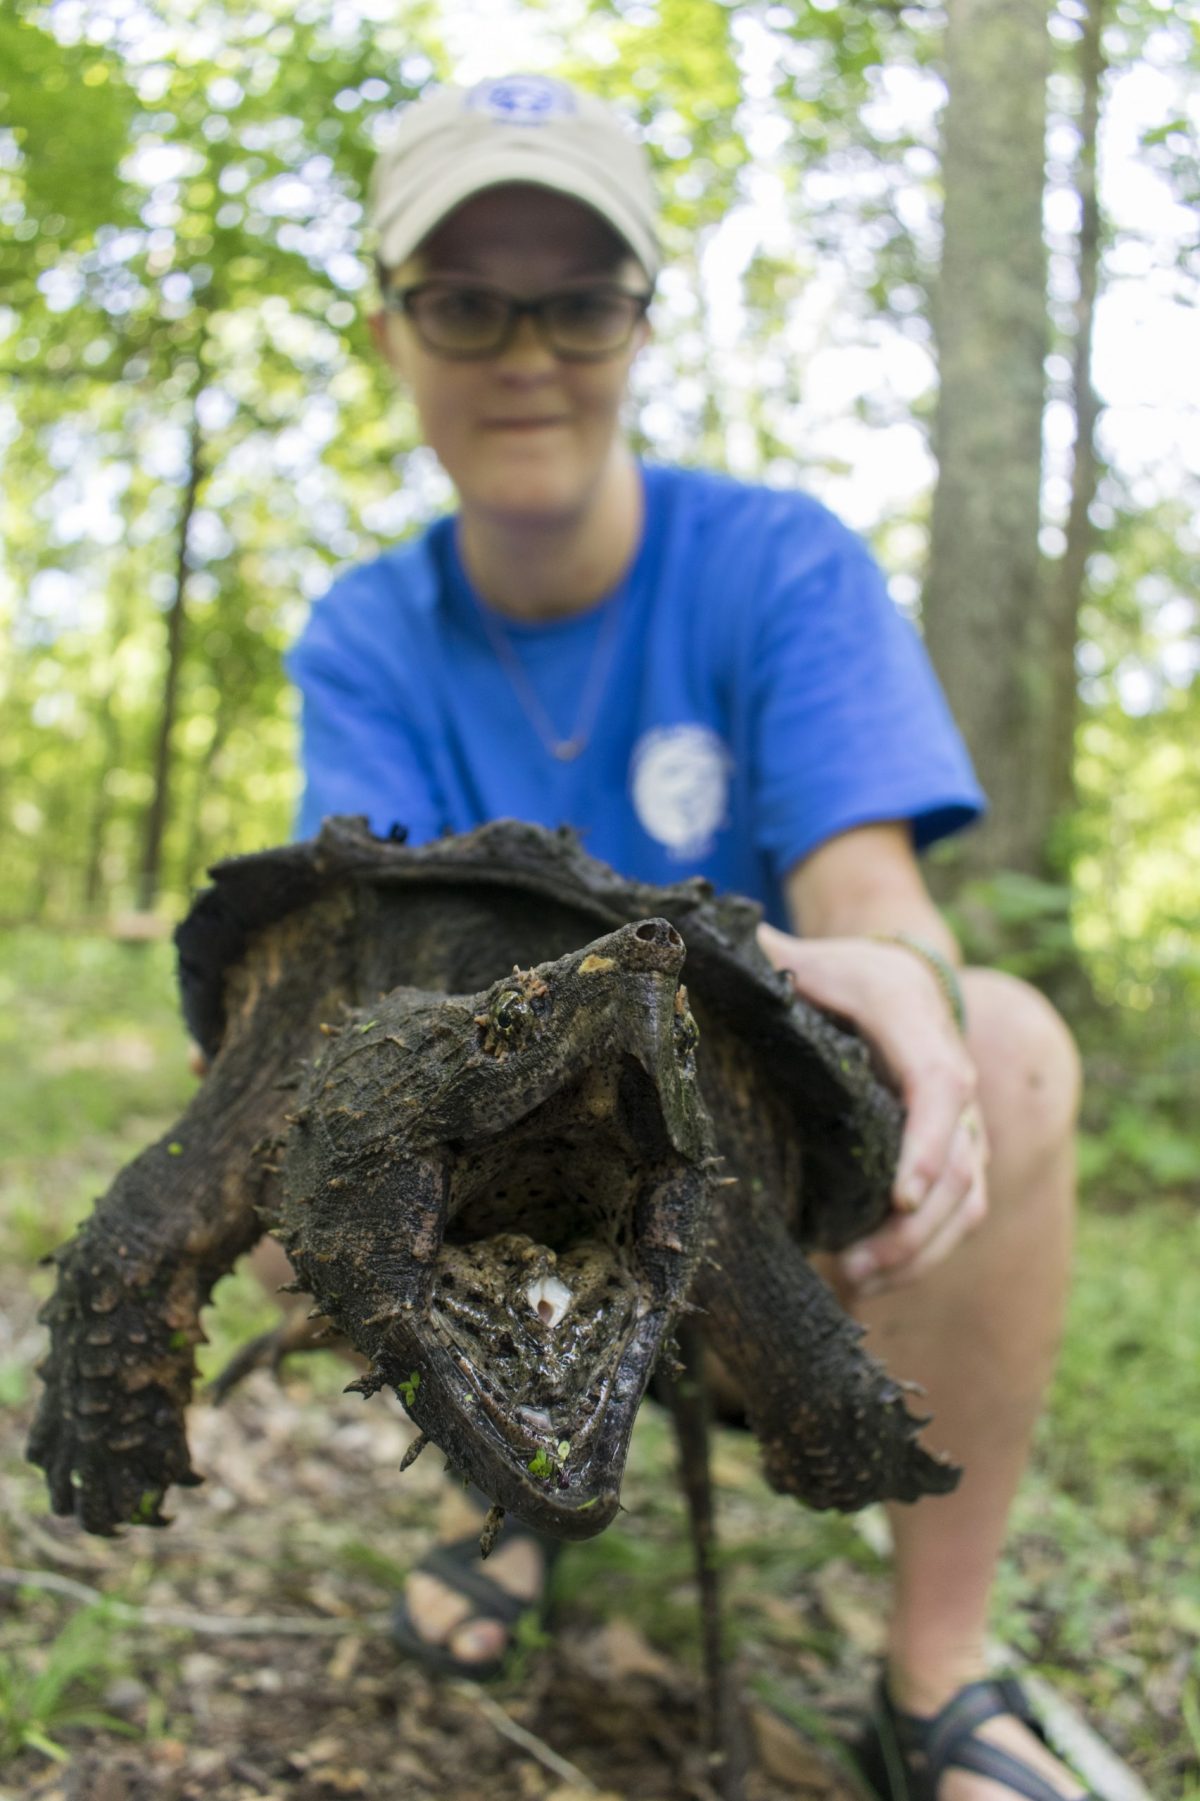 A Conservation Institute staff member holds up an Alligator Snapping Turtle collected as part of a project to radio tag and track these prehistoric reptiles.